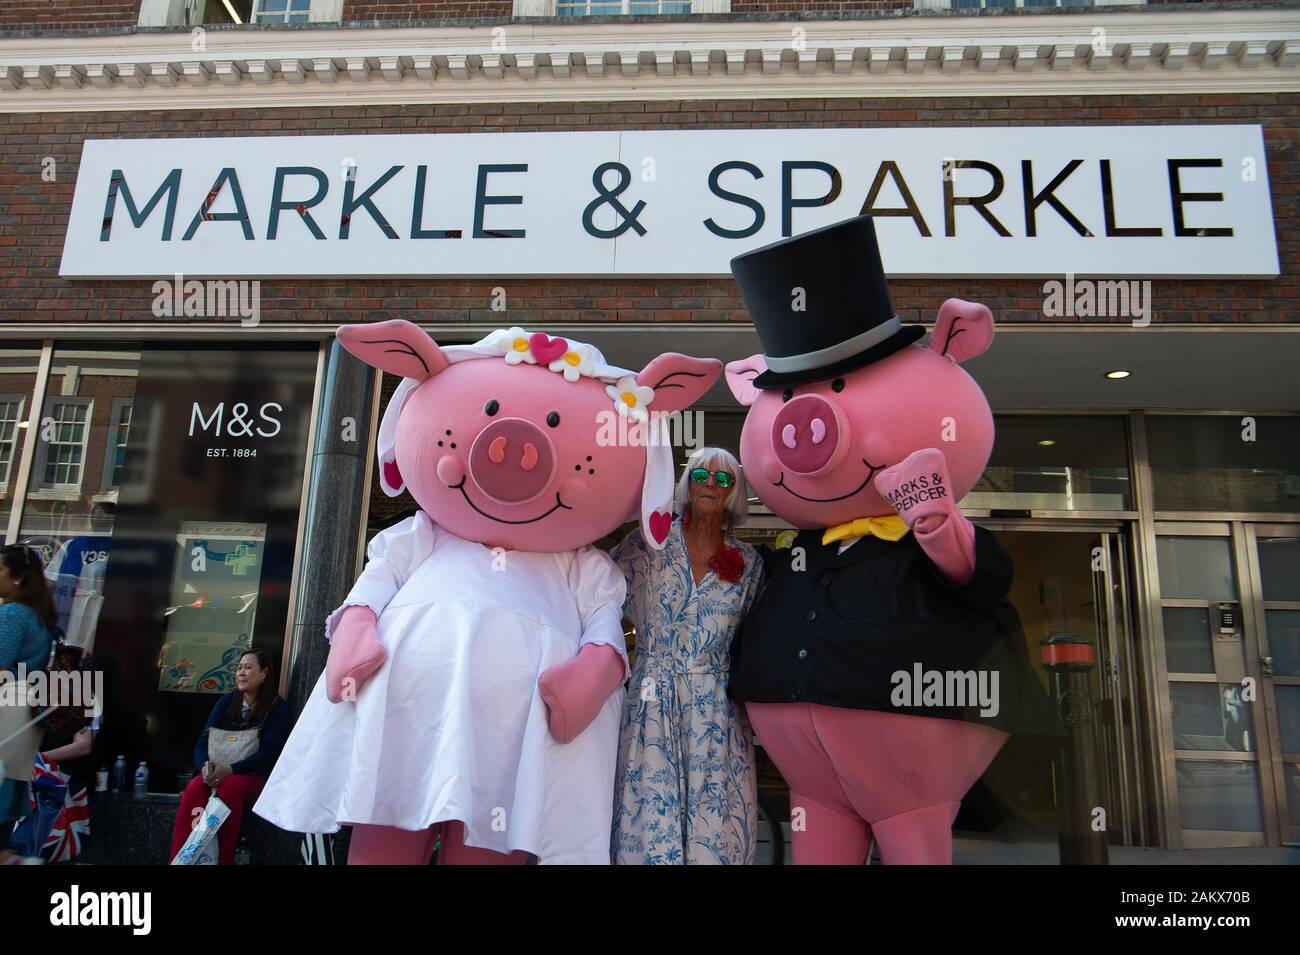 Royal Wedding Day, Windsor, Berkshire, UK. 19th May, 2018.  Marks & Spencer in Peascod Street put up a special Markle & Sparkle sign on the outside of their shop and had Percy Pig characters delighting the crowds on the day of the Royal Wedding of Prince Harry and Meghan Markle. Credit: Maureen McLean/Alamy Stock Photo